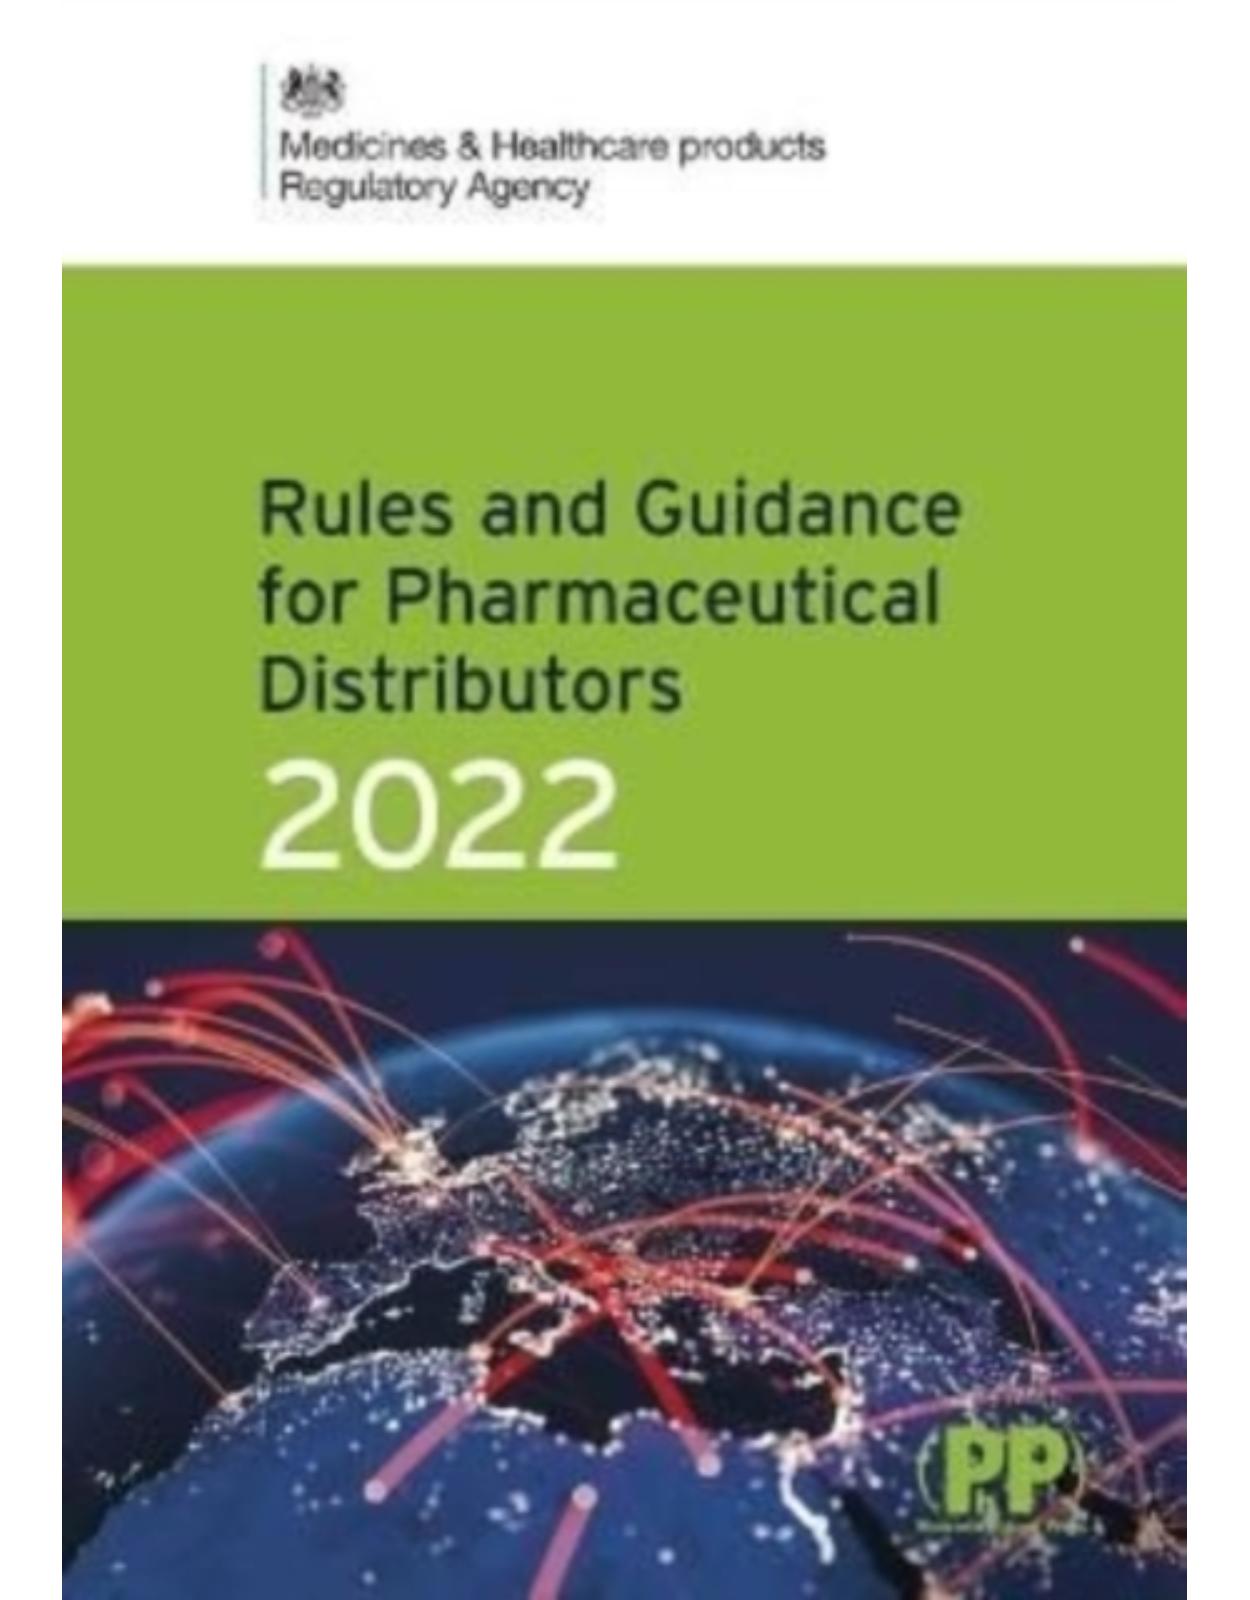 Rules and Guidance for Pharmaceutical Distributors (Green Guide) 2022